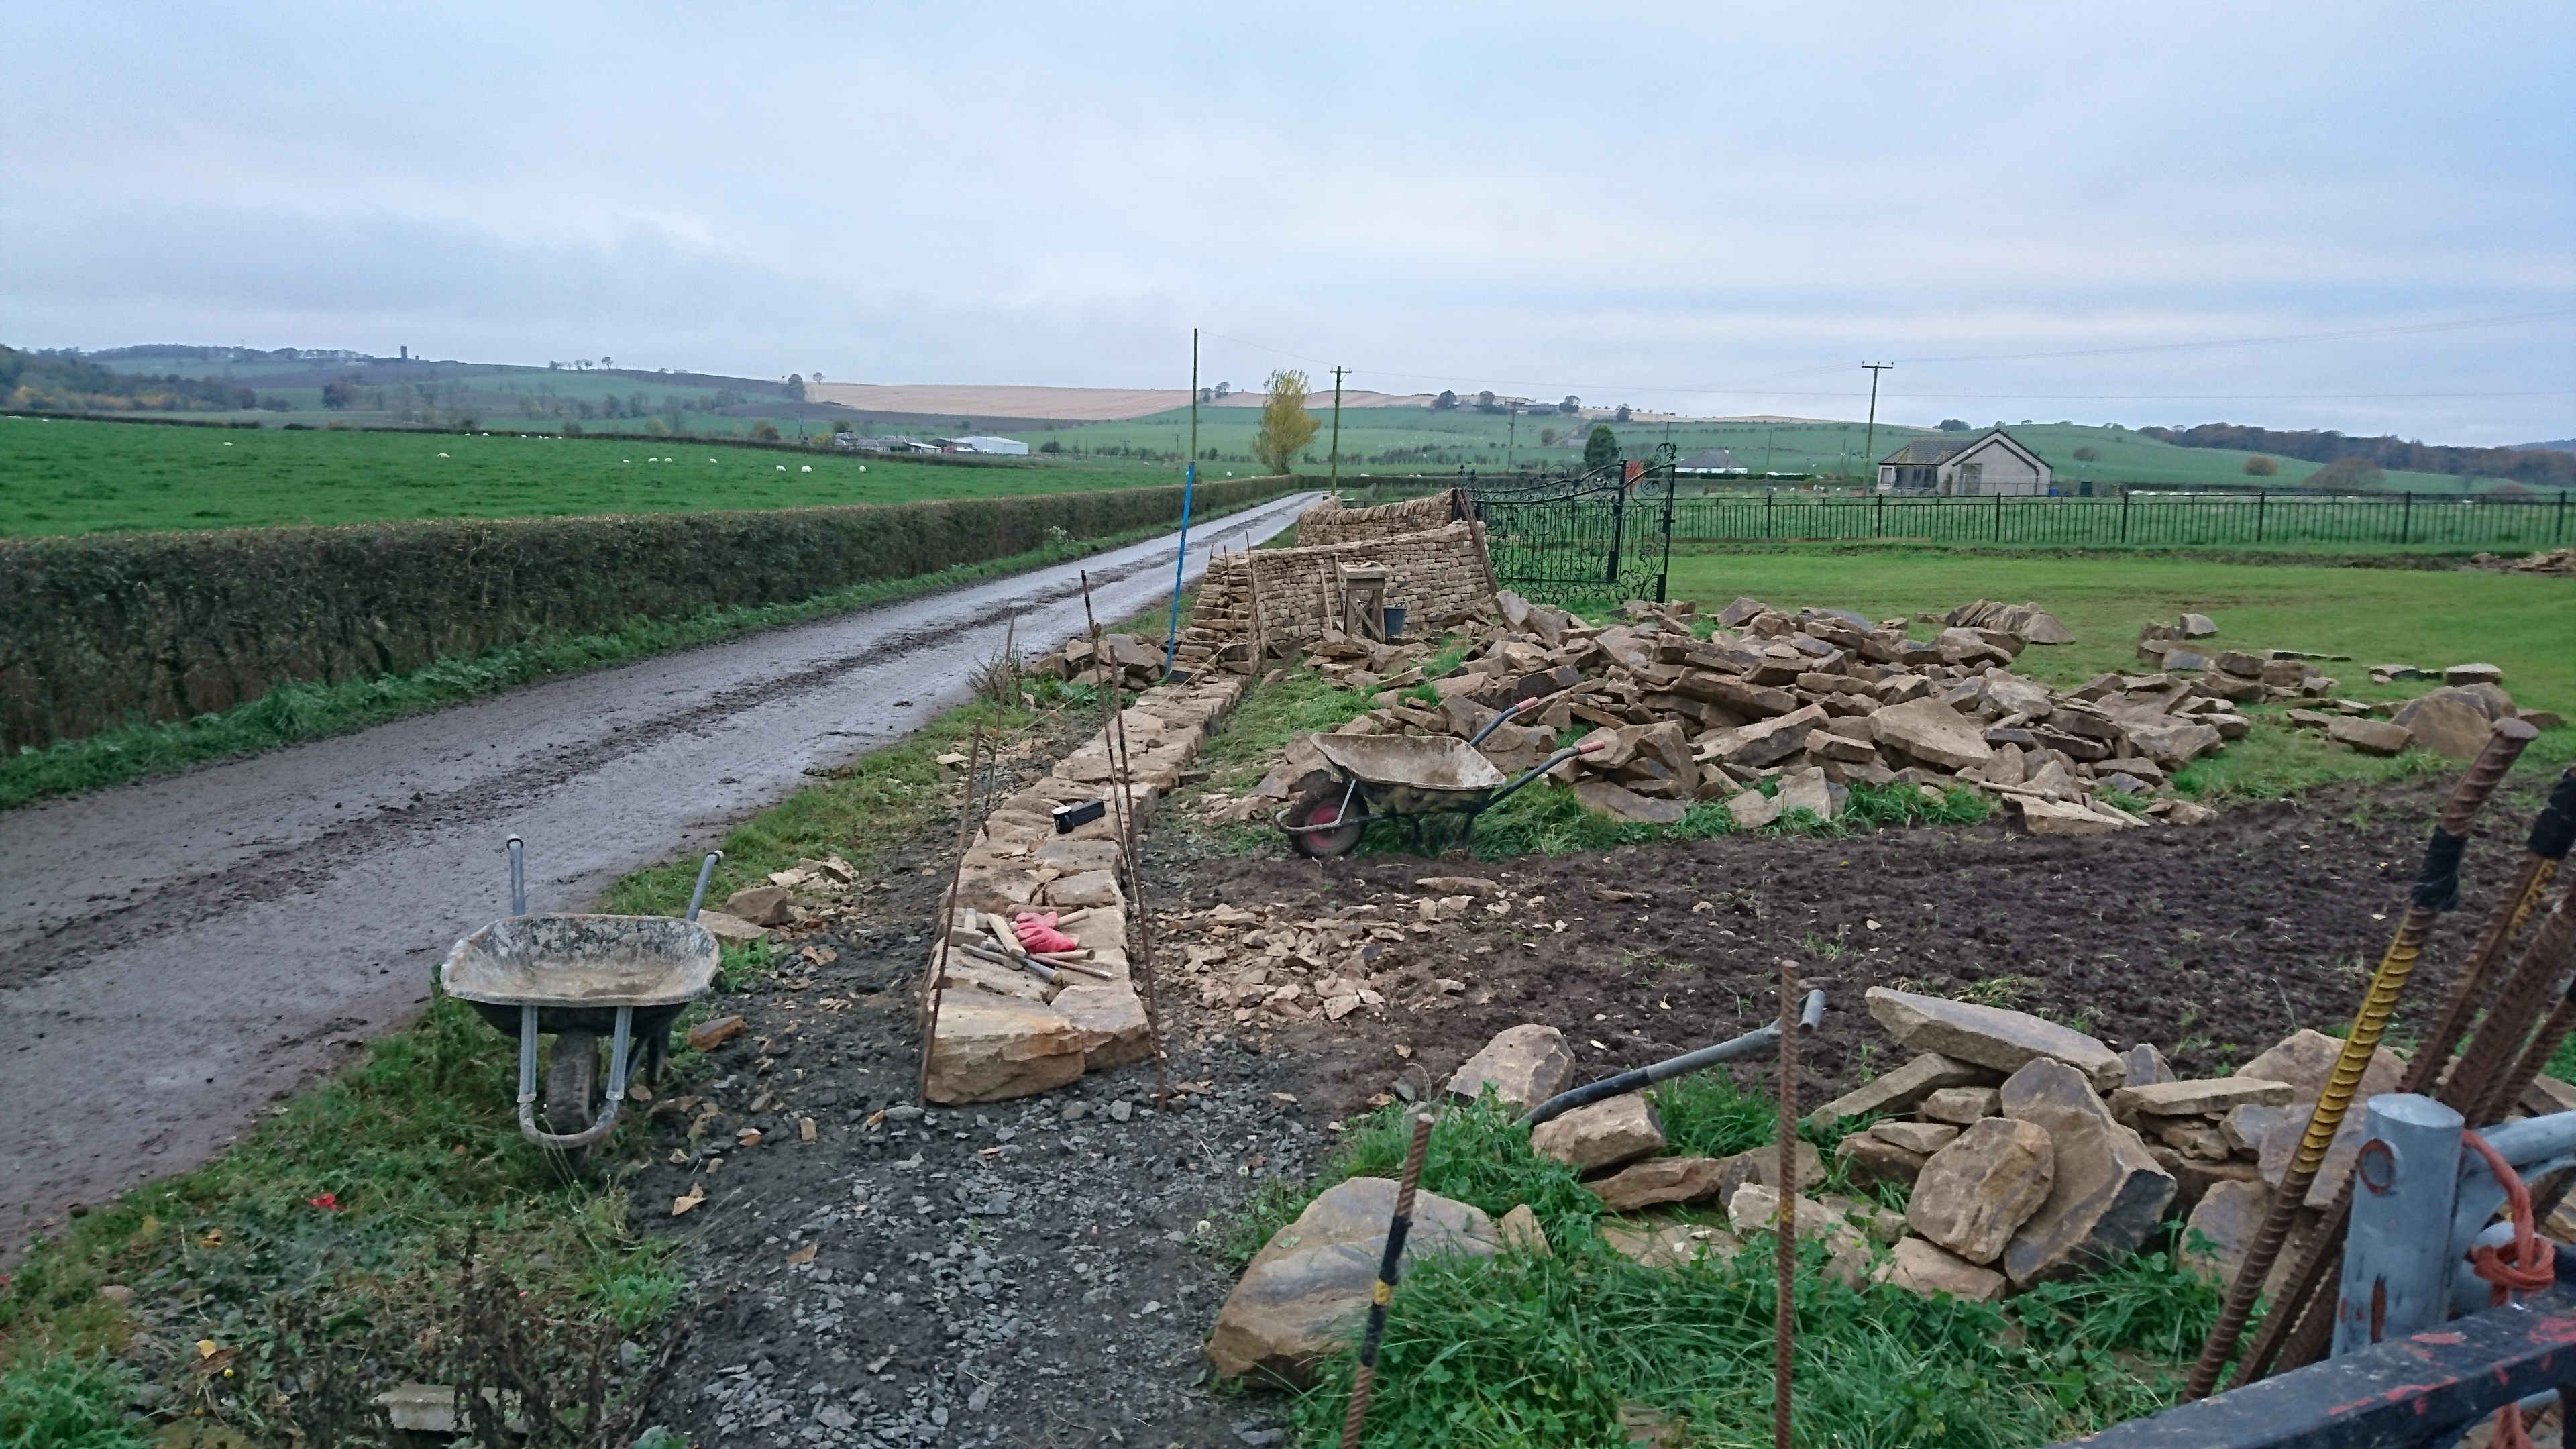 Ceres Fife free-standing dry stone boundary wall